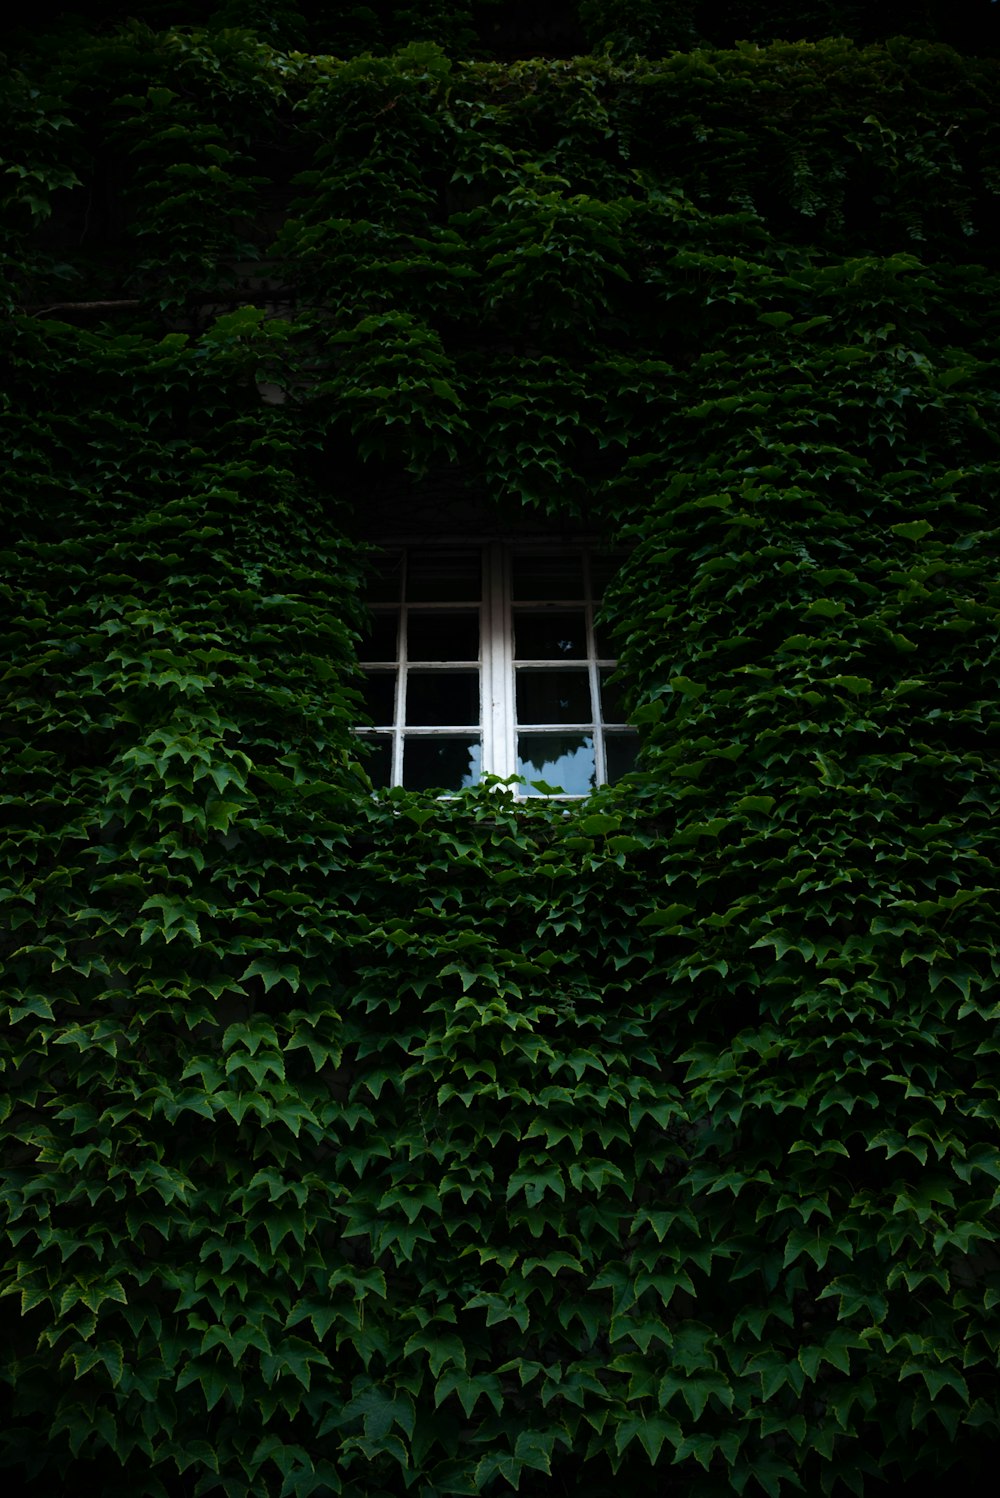 a window is surrounded by green foliage